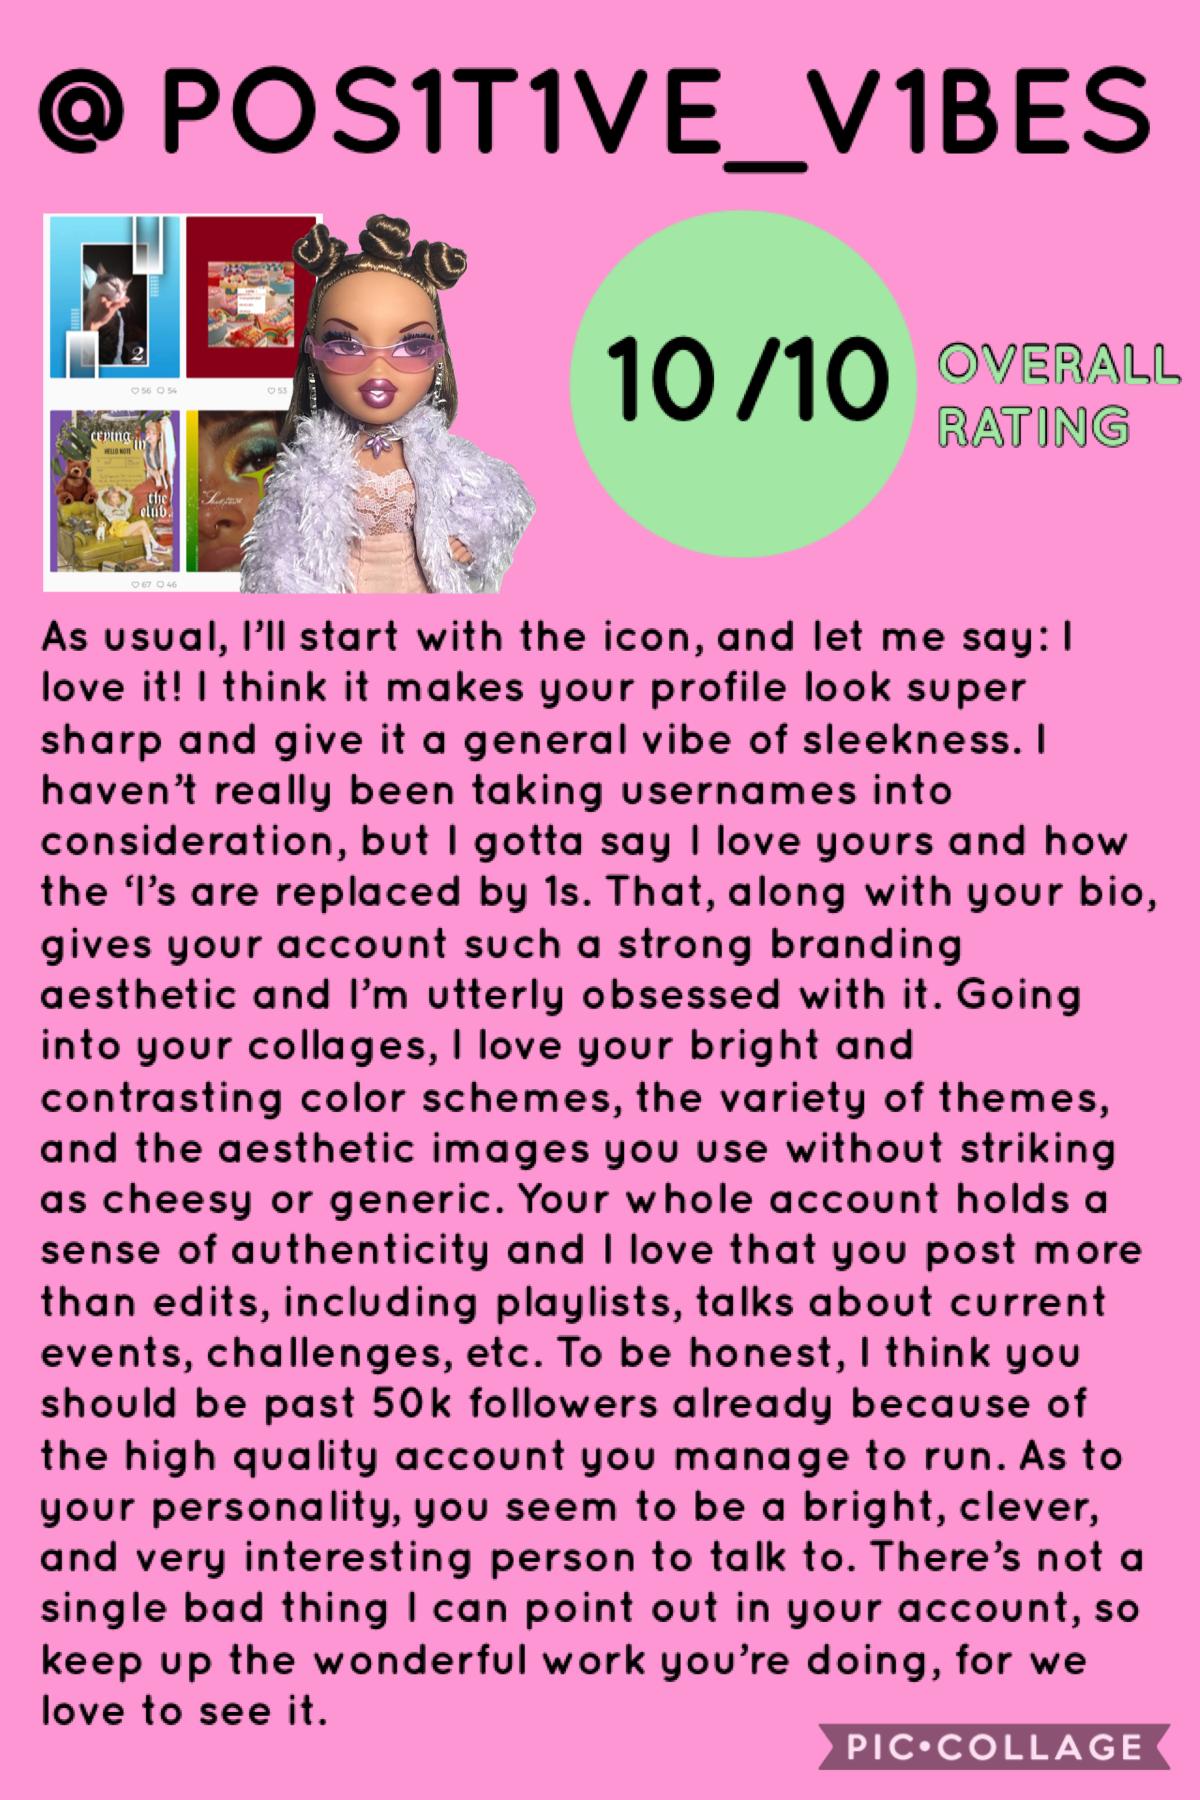 👛 tap 👛
DISCLAIMER: This is JUST my opinion. I said what I said and I meant what I said, PERIODT! Here is the first perfect score account! Make sure to check out the stunning account @POS1T1VE_V1BES 💗